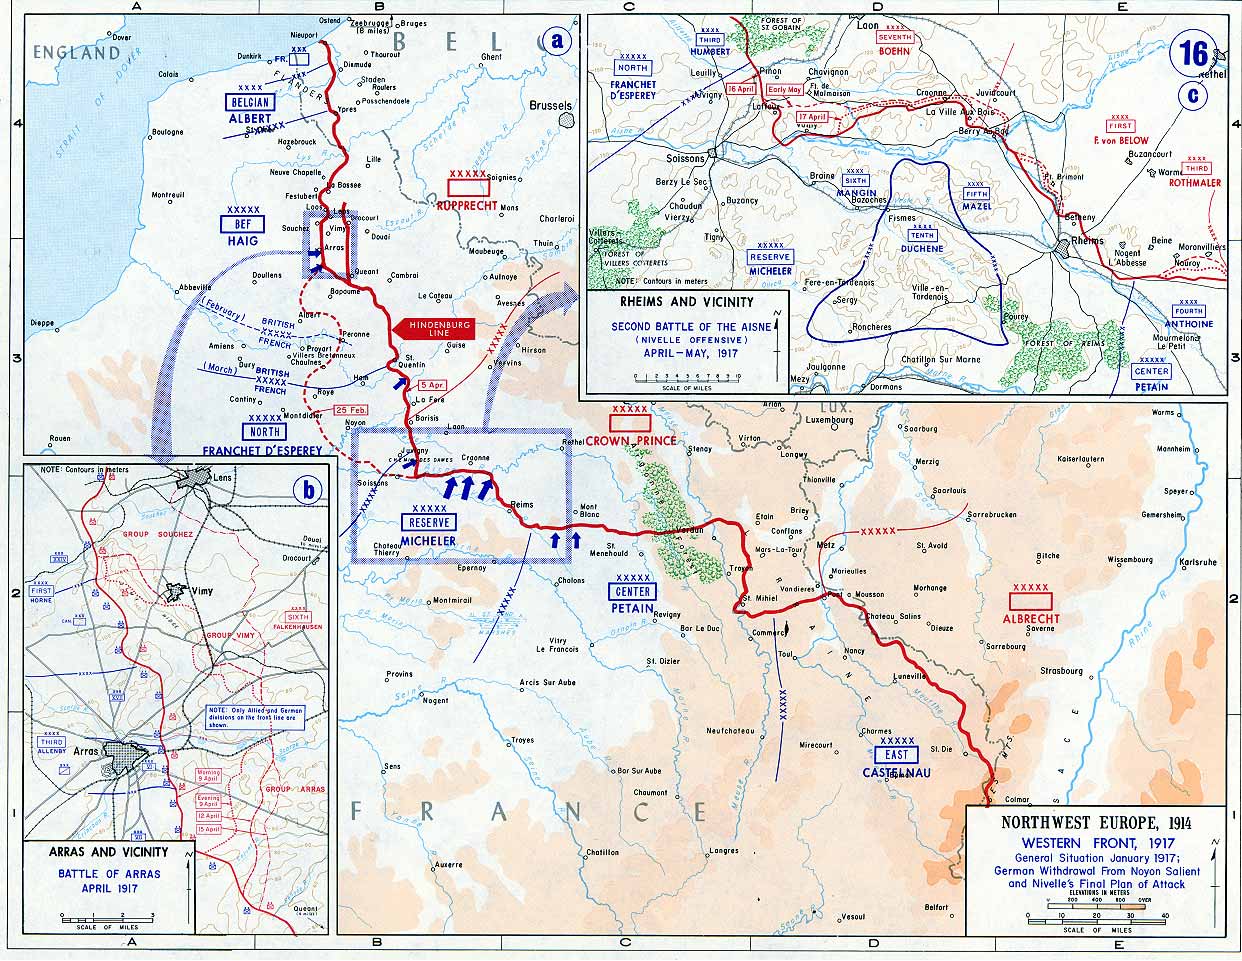 1706456893 865 The French 1917 Offensive in Context of 1914 17